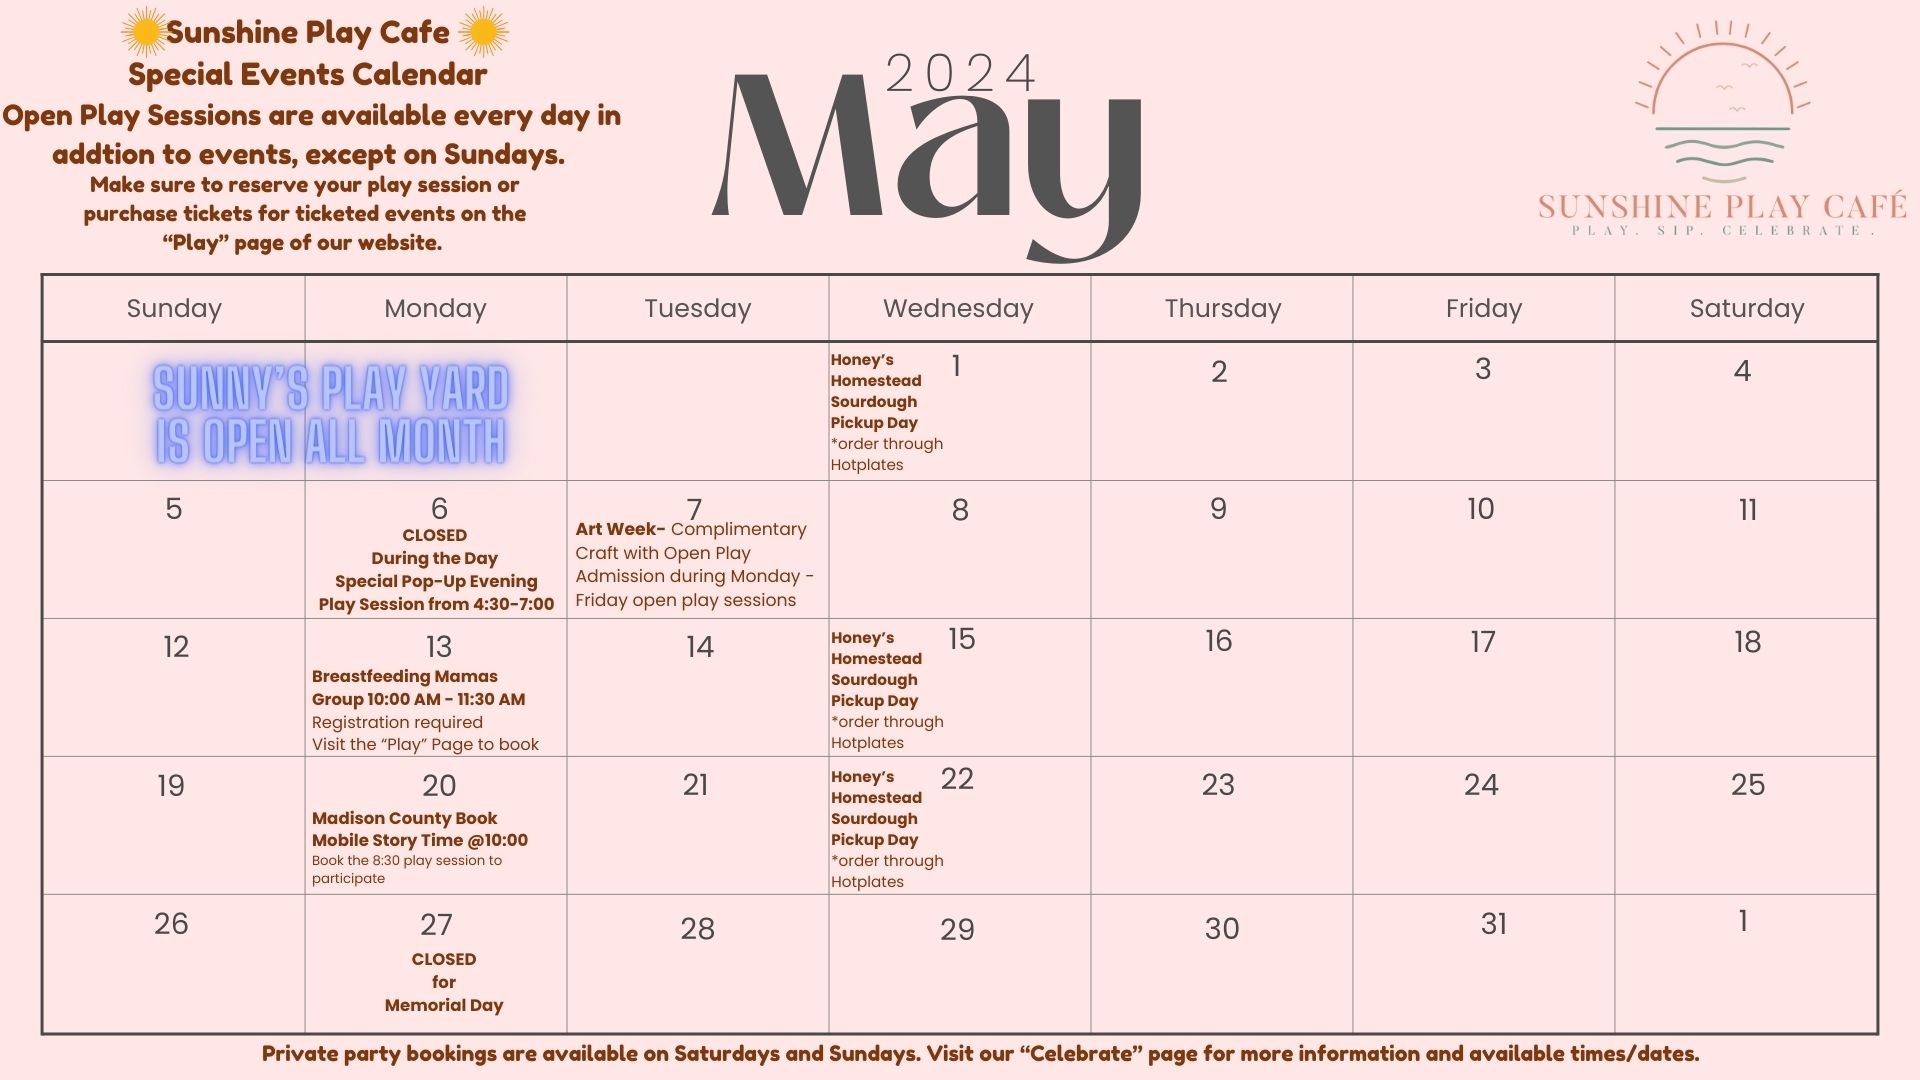 ✨ UPDATED MAY CALENDAR ✨
Story time with the Madison County Public Library Book Mobile will only be on Monday, May 20 this month.